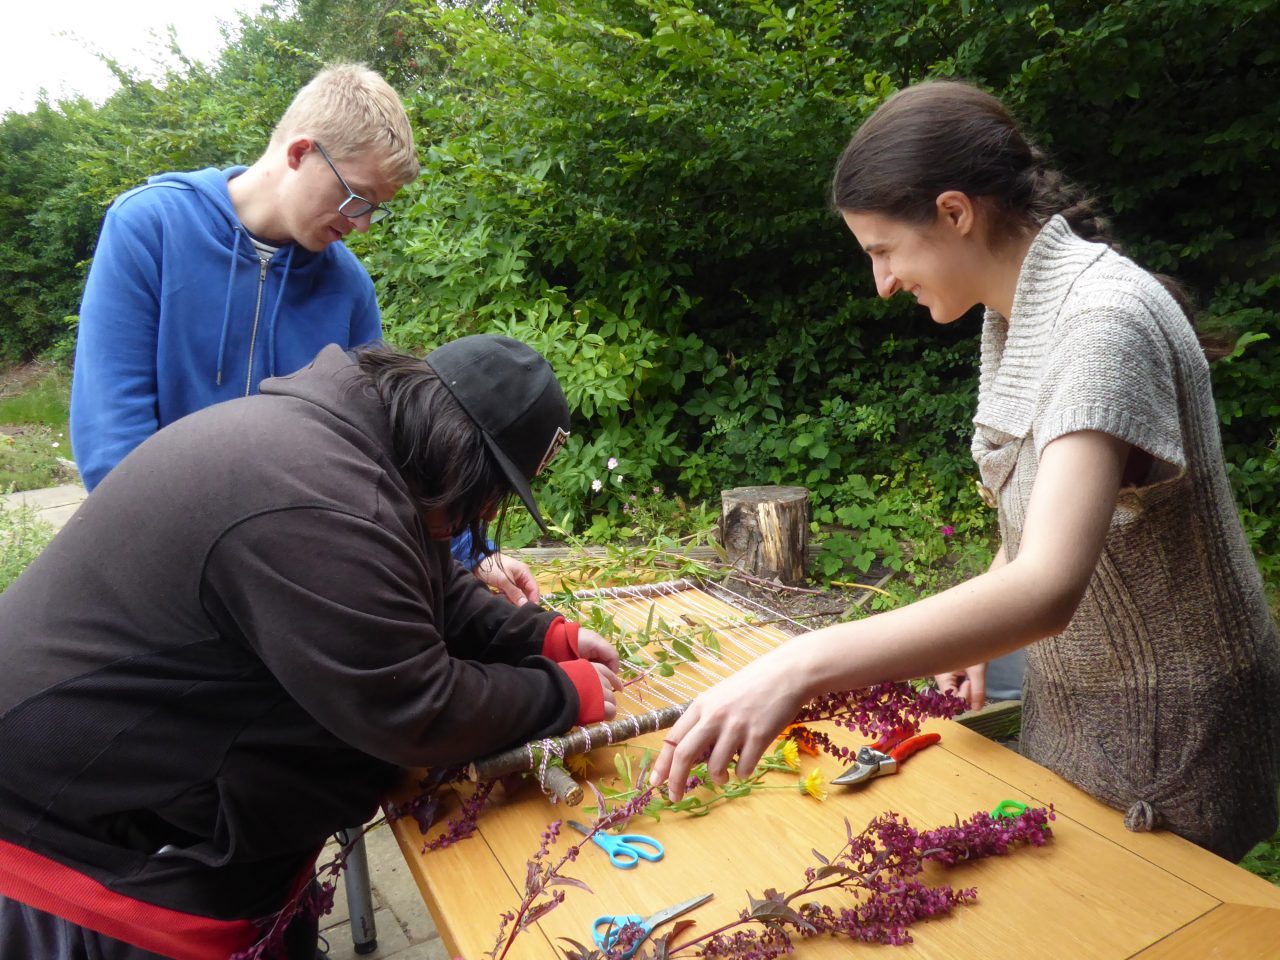 A photo of a group weaving together flowers and foliage to make an art installation.